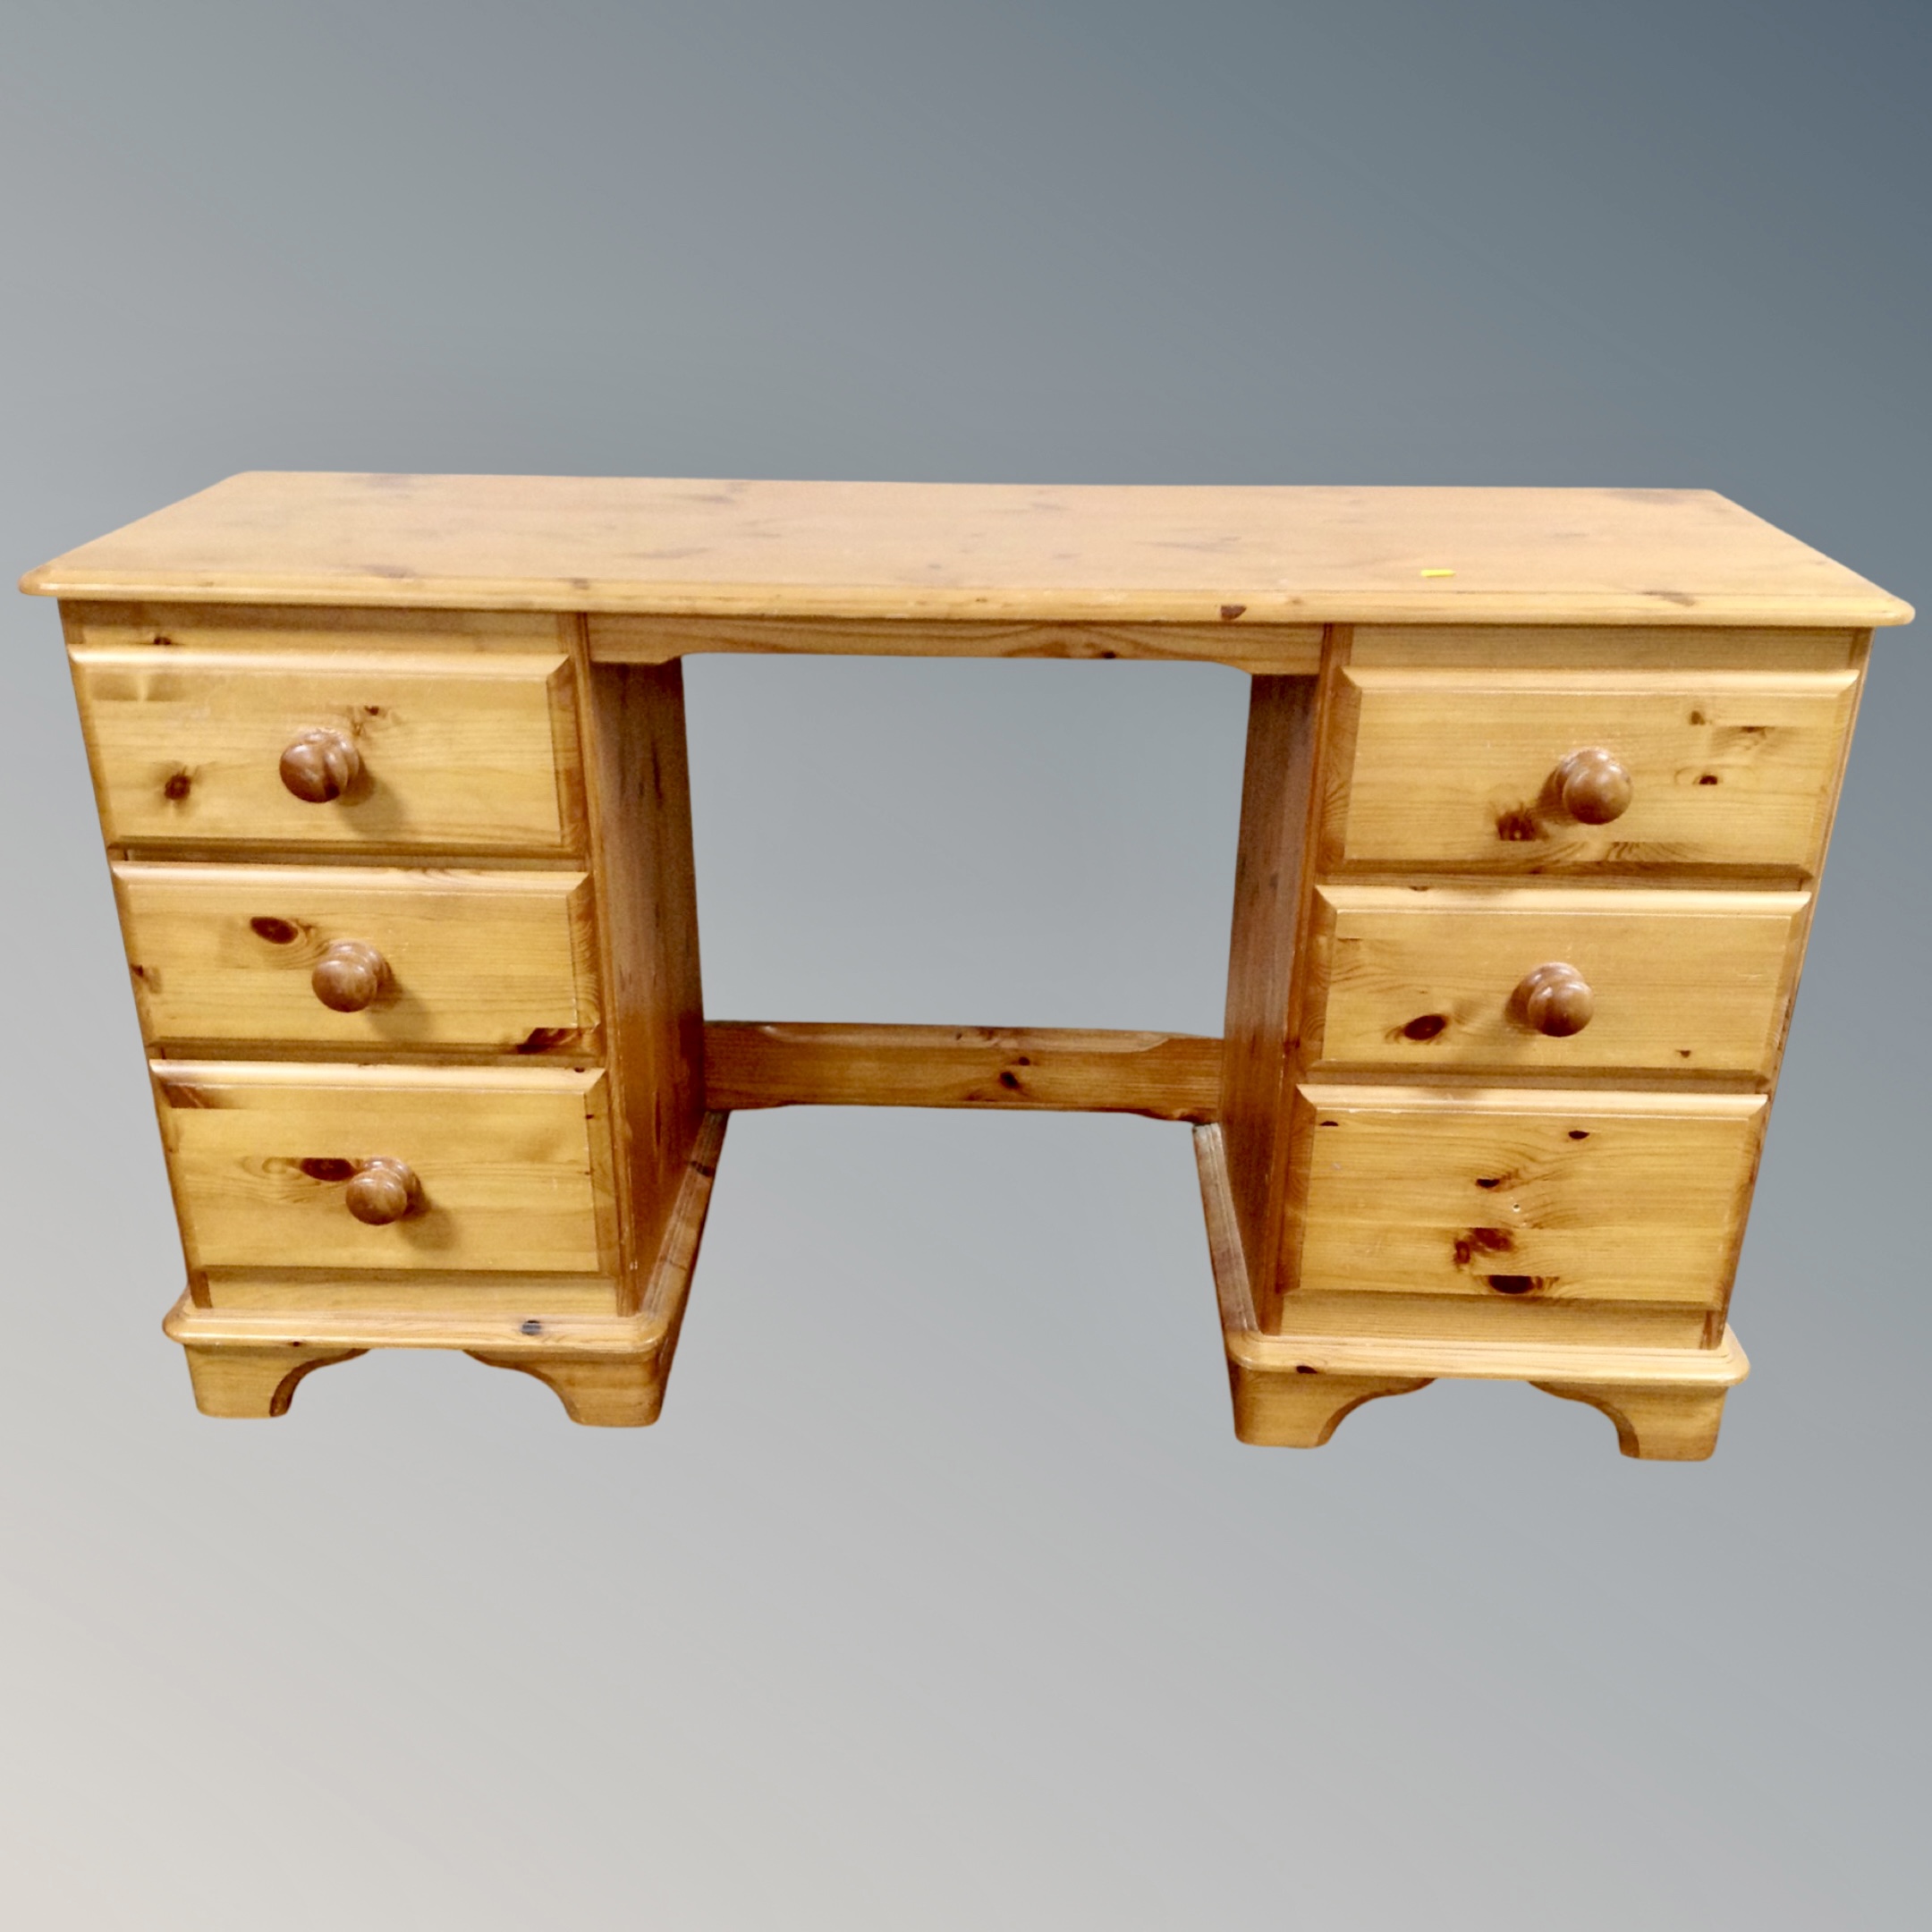 A pine twin-pedestal dressing table